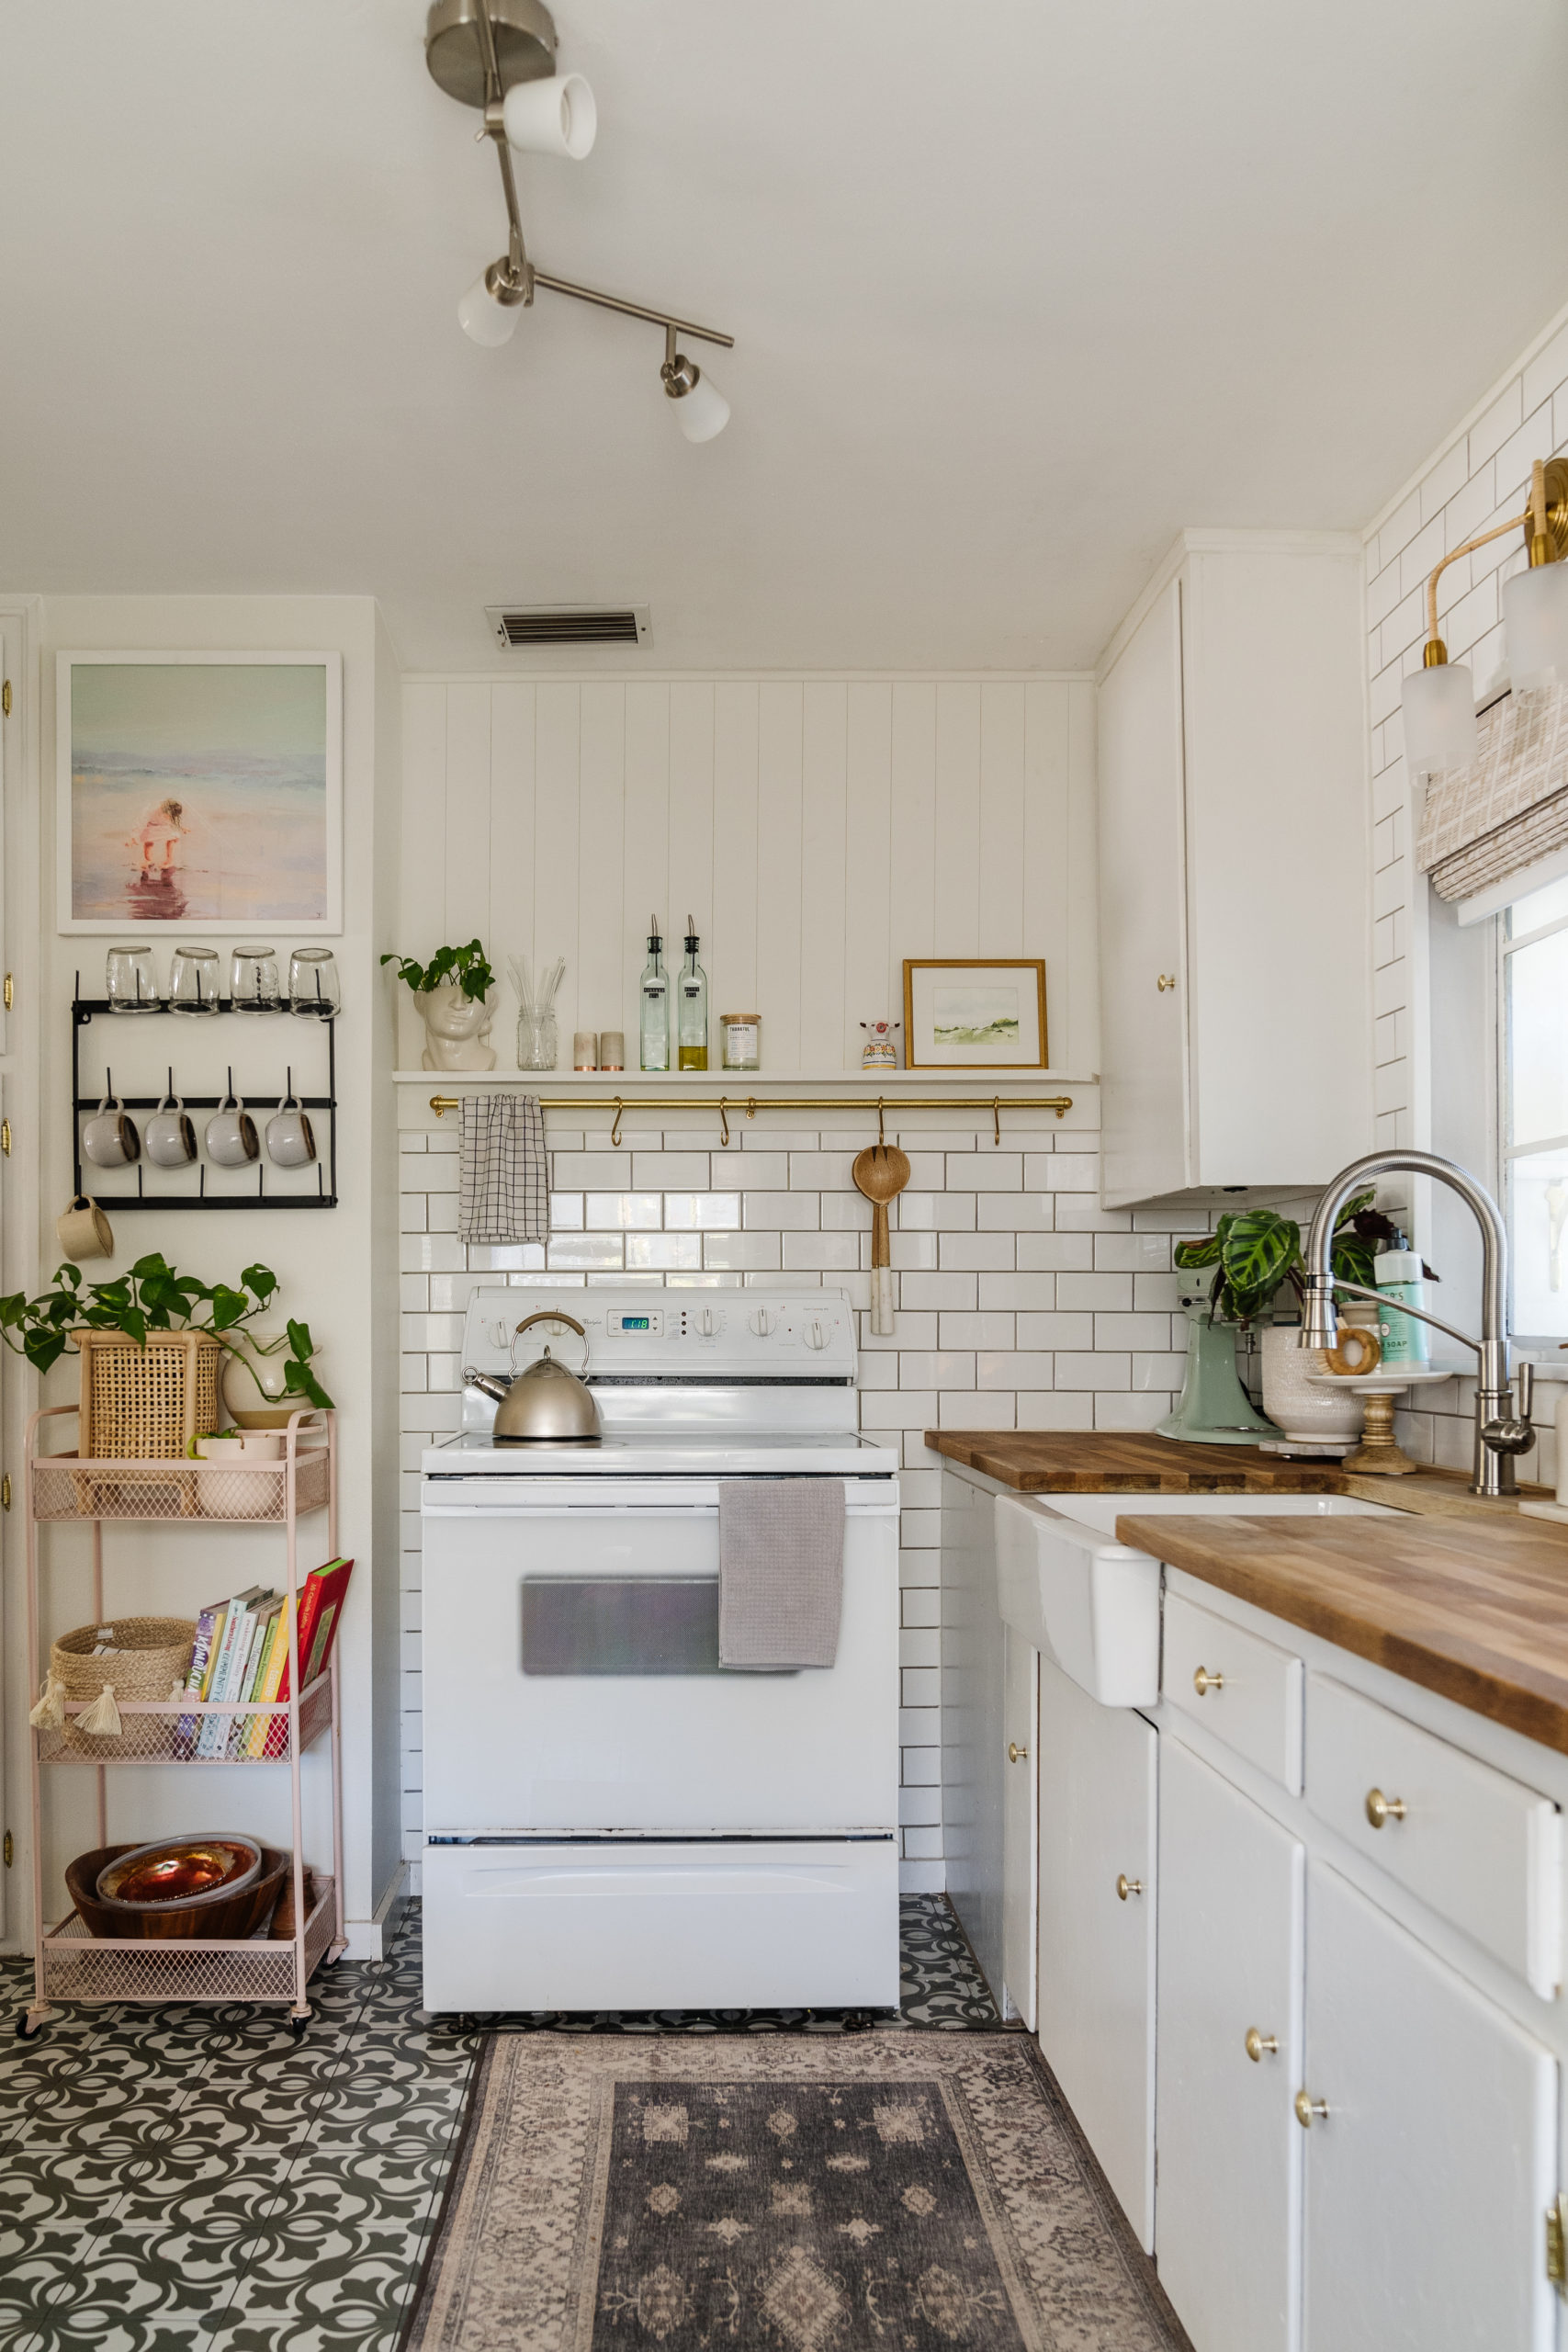 Eclectic Kitchens + A Great Design Book